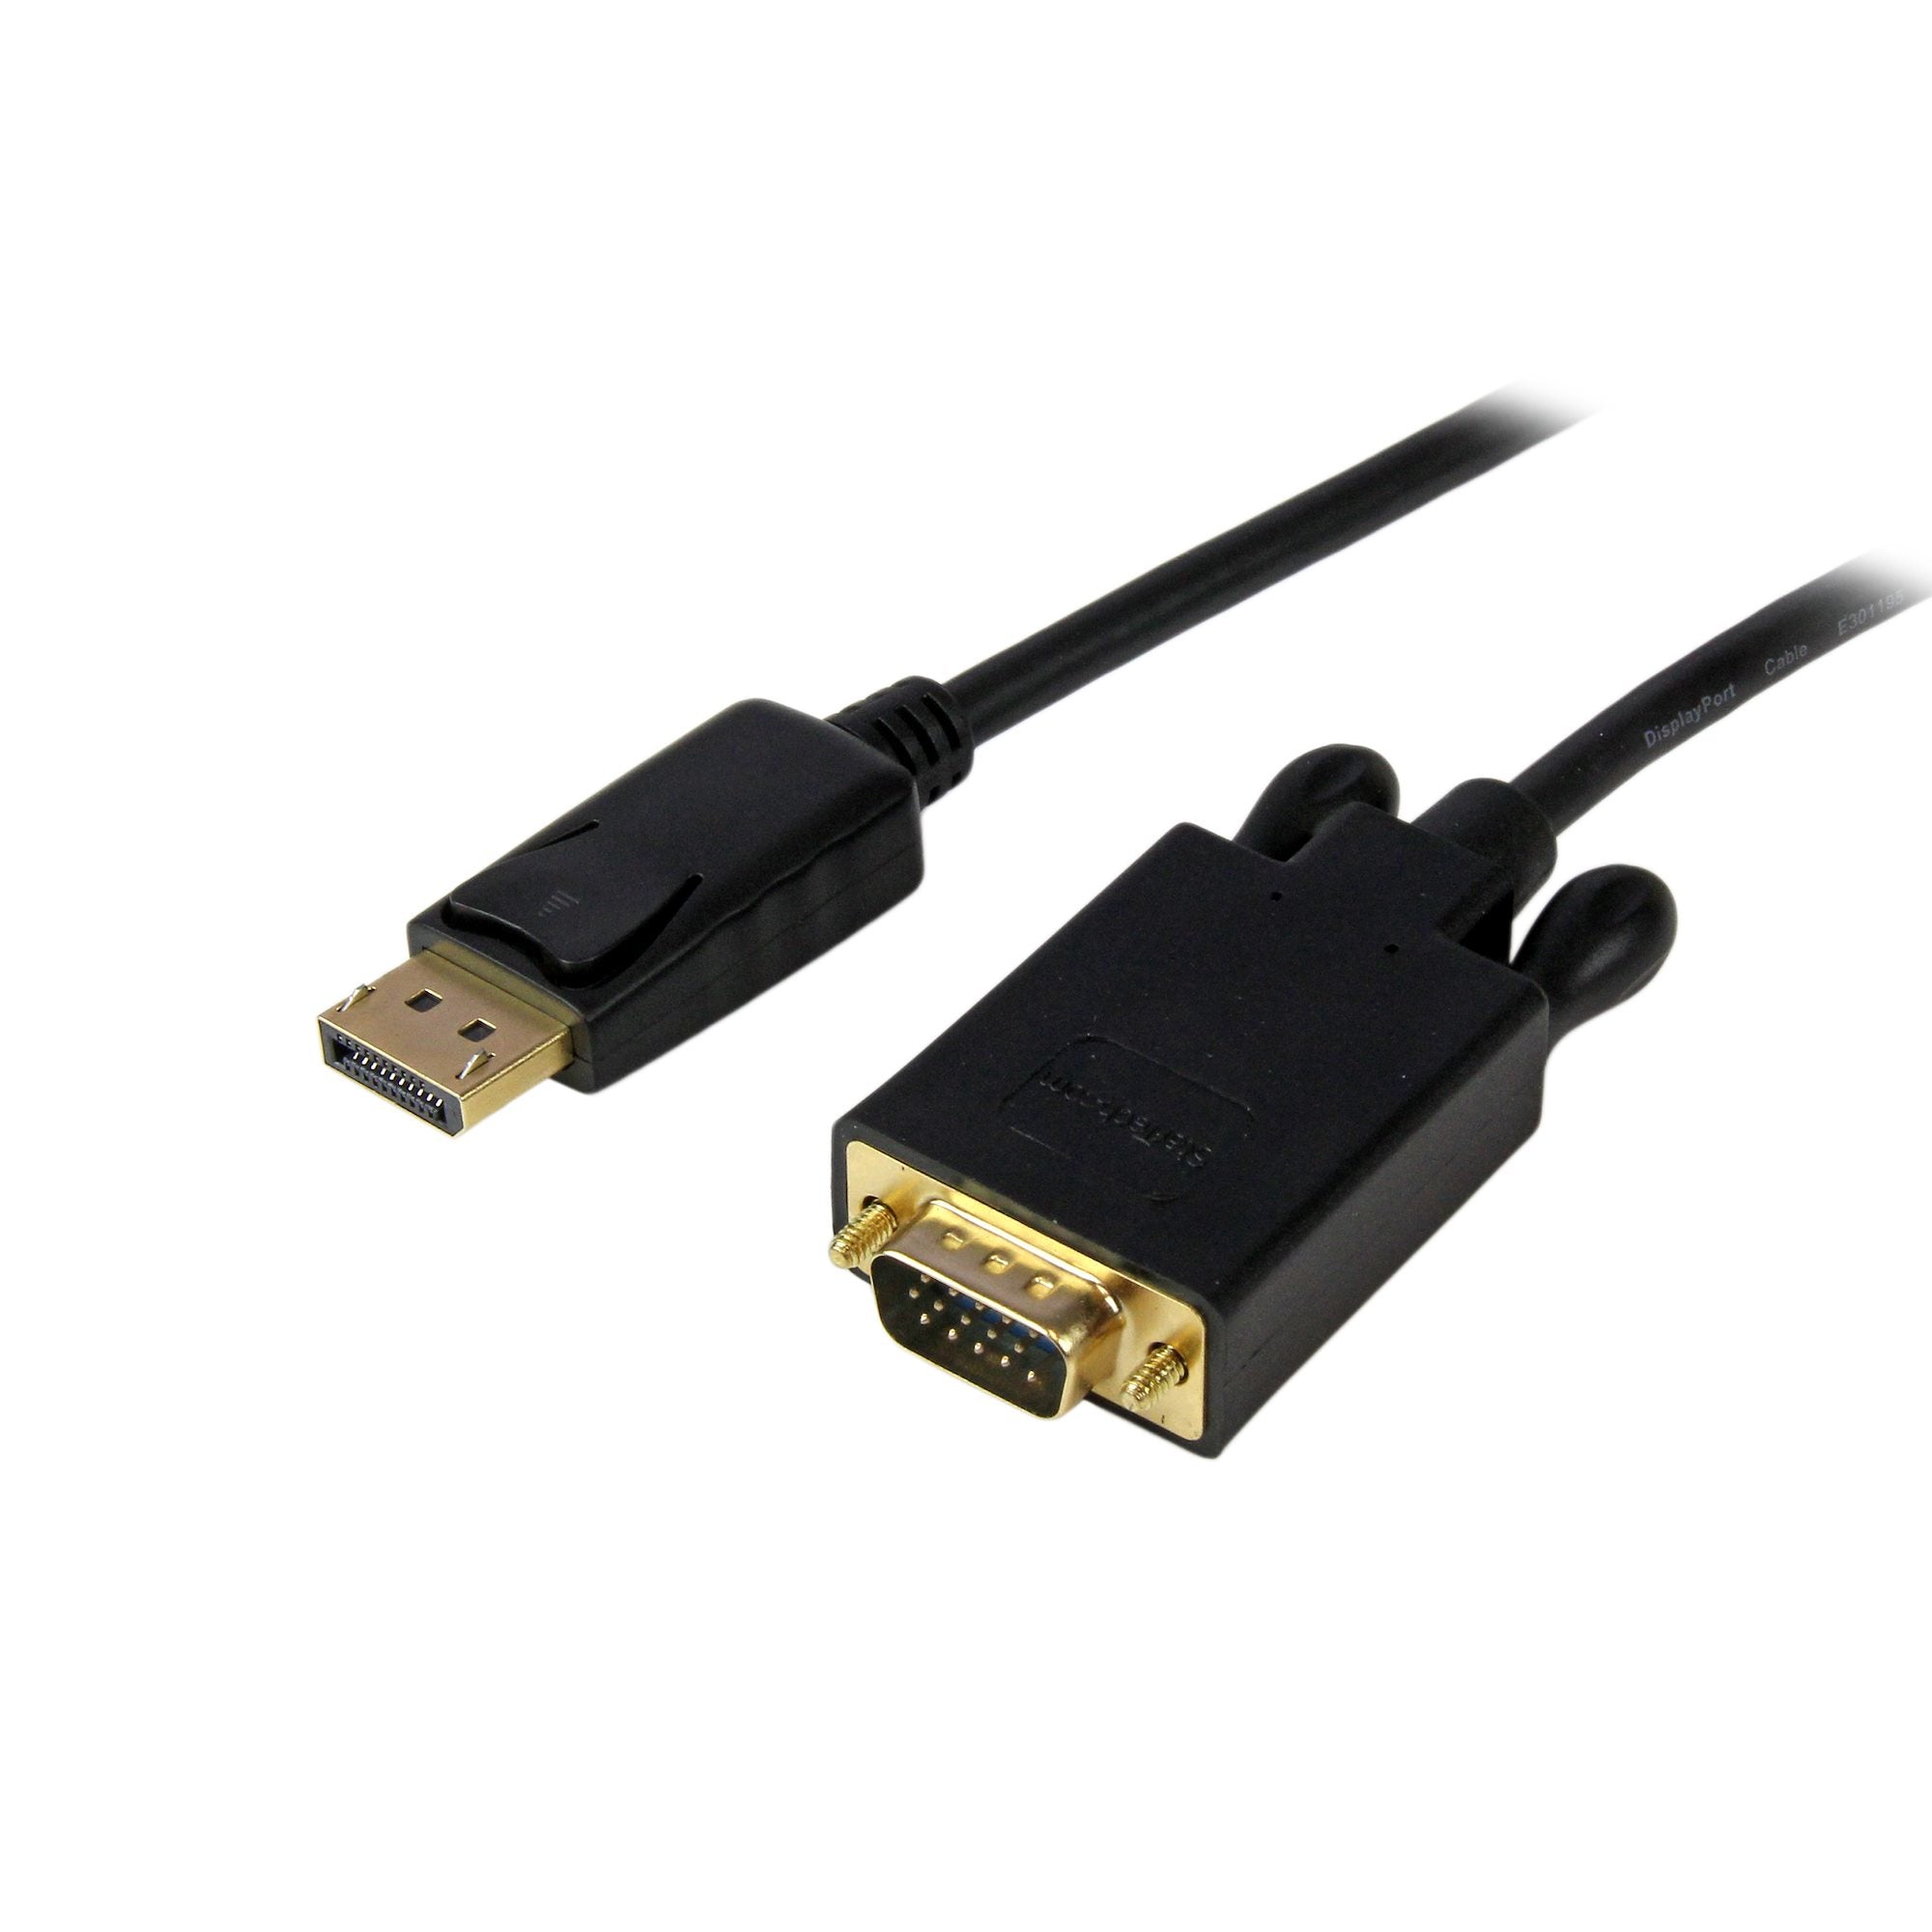 StarTech.com 15ft (4.6m) DisplayPort to VGA Cable - Active DisplayPort to VGA Adapter Cable - 1080p Video - DP to VGA Monitor Cable - DP 1.2 to VGA Converter - Latching DP Connector